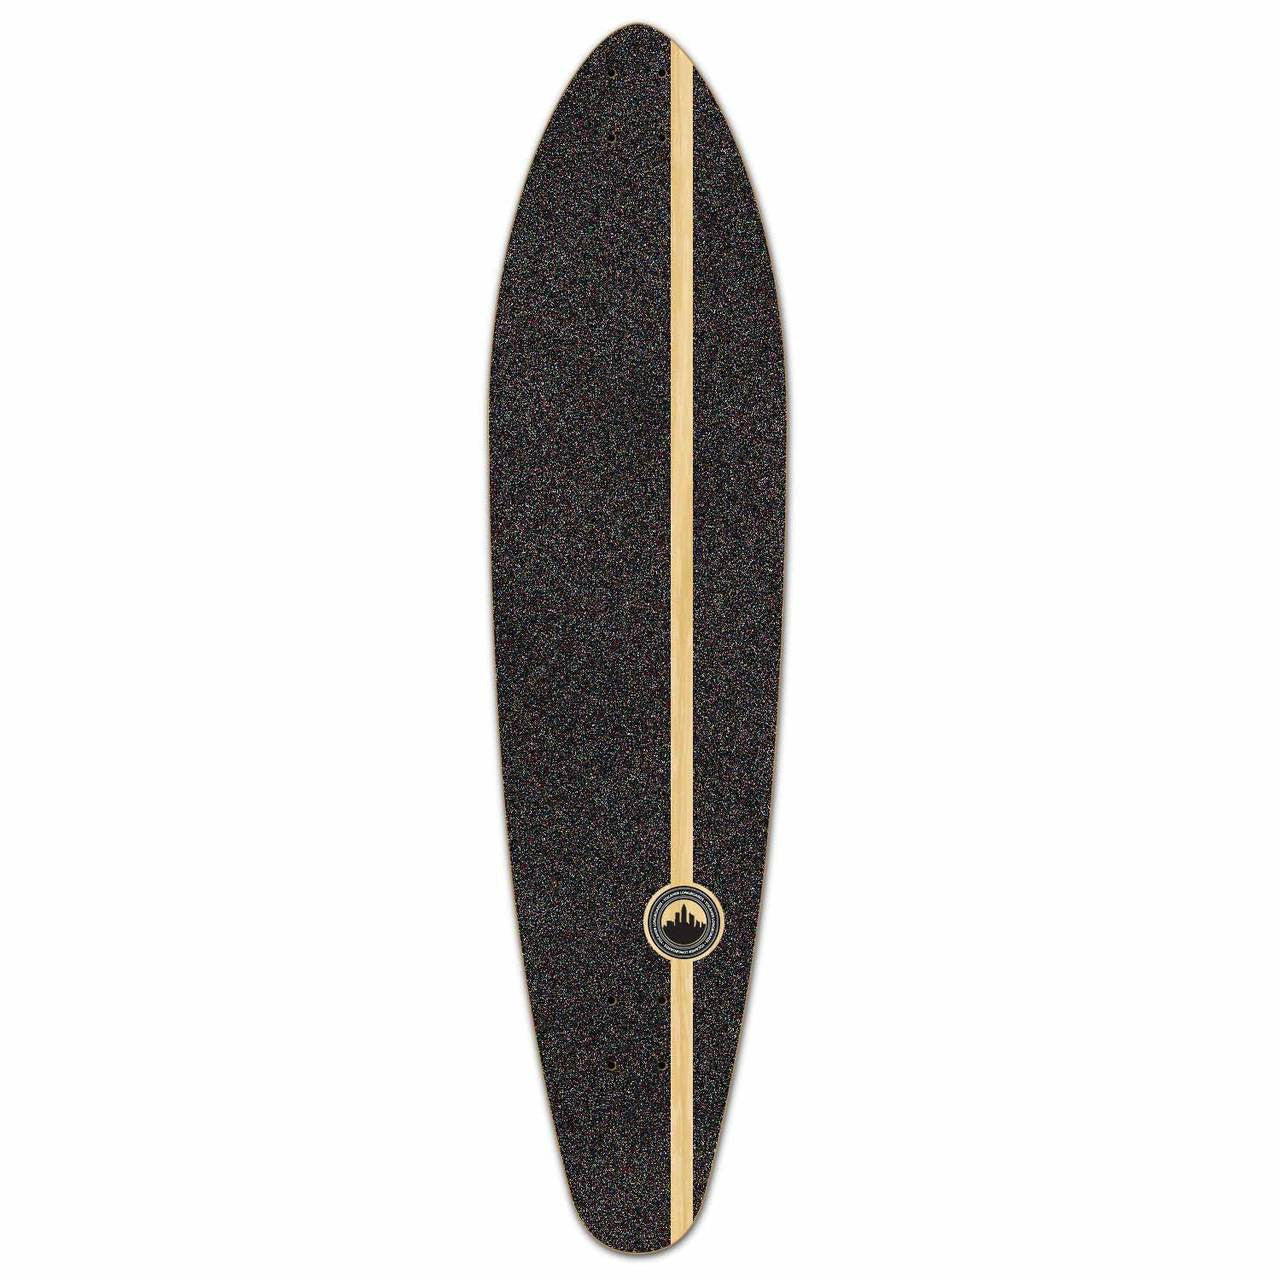 Yocaher Kicktail Longboard Deck - In the Pines : Blue